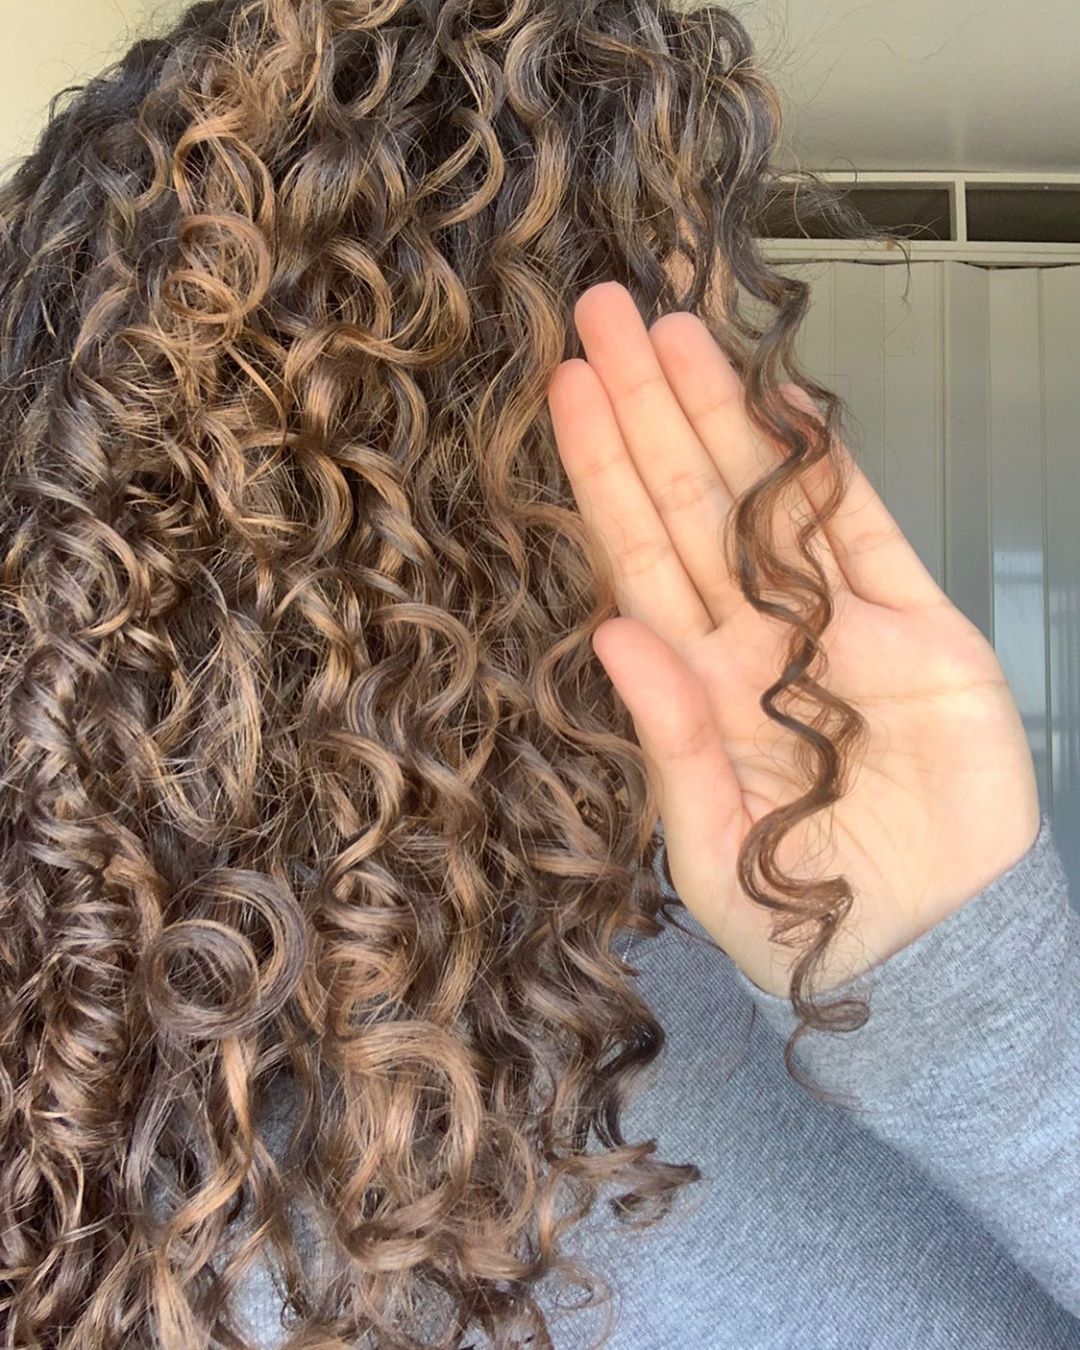 10 Leave-In Conditioners to Give You the Best Moisturized Curls